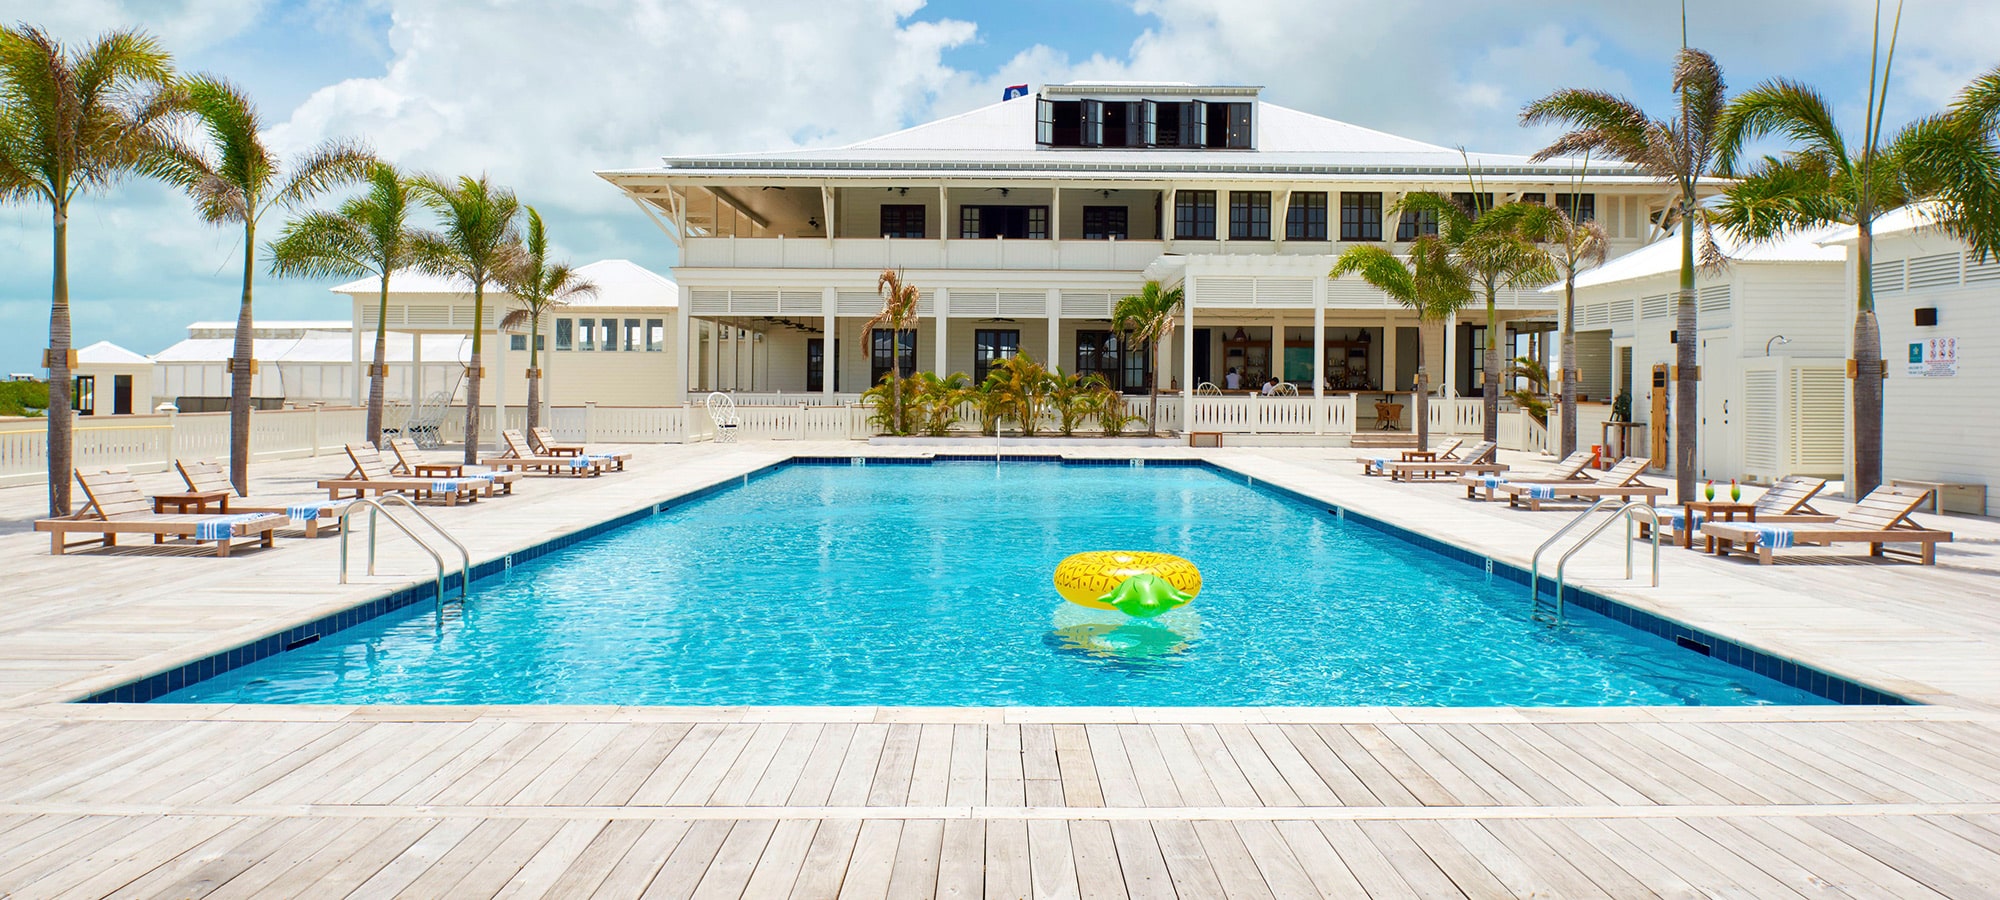 Take a look inside the newest resort to open on Ambergris Caye.